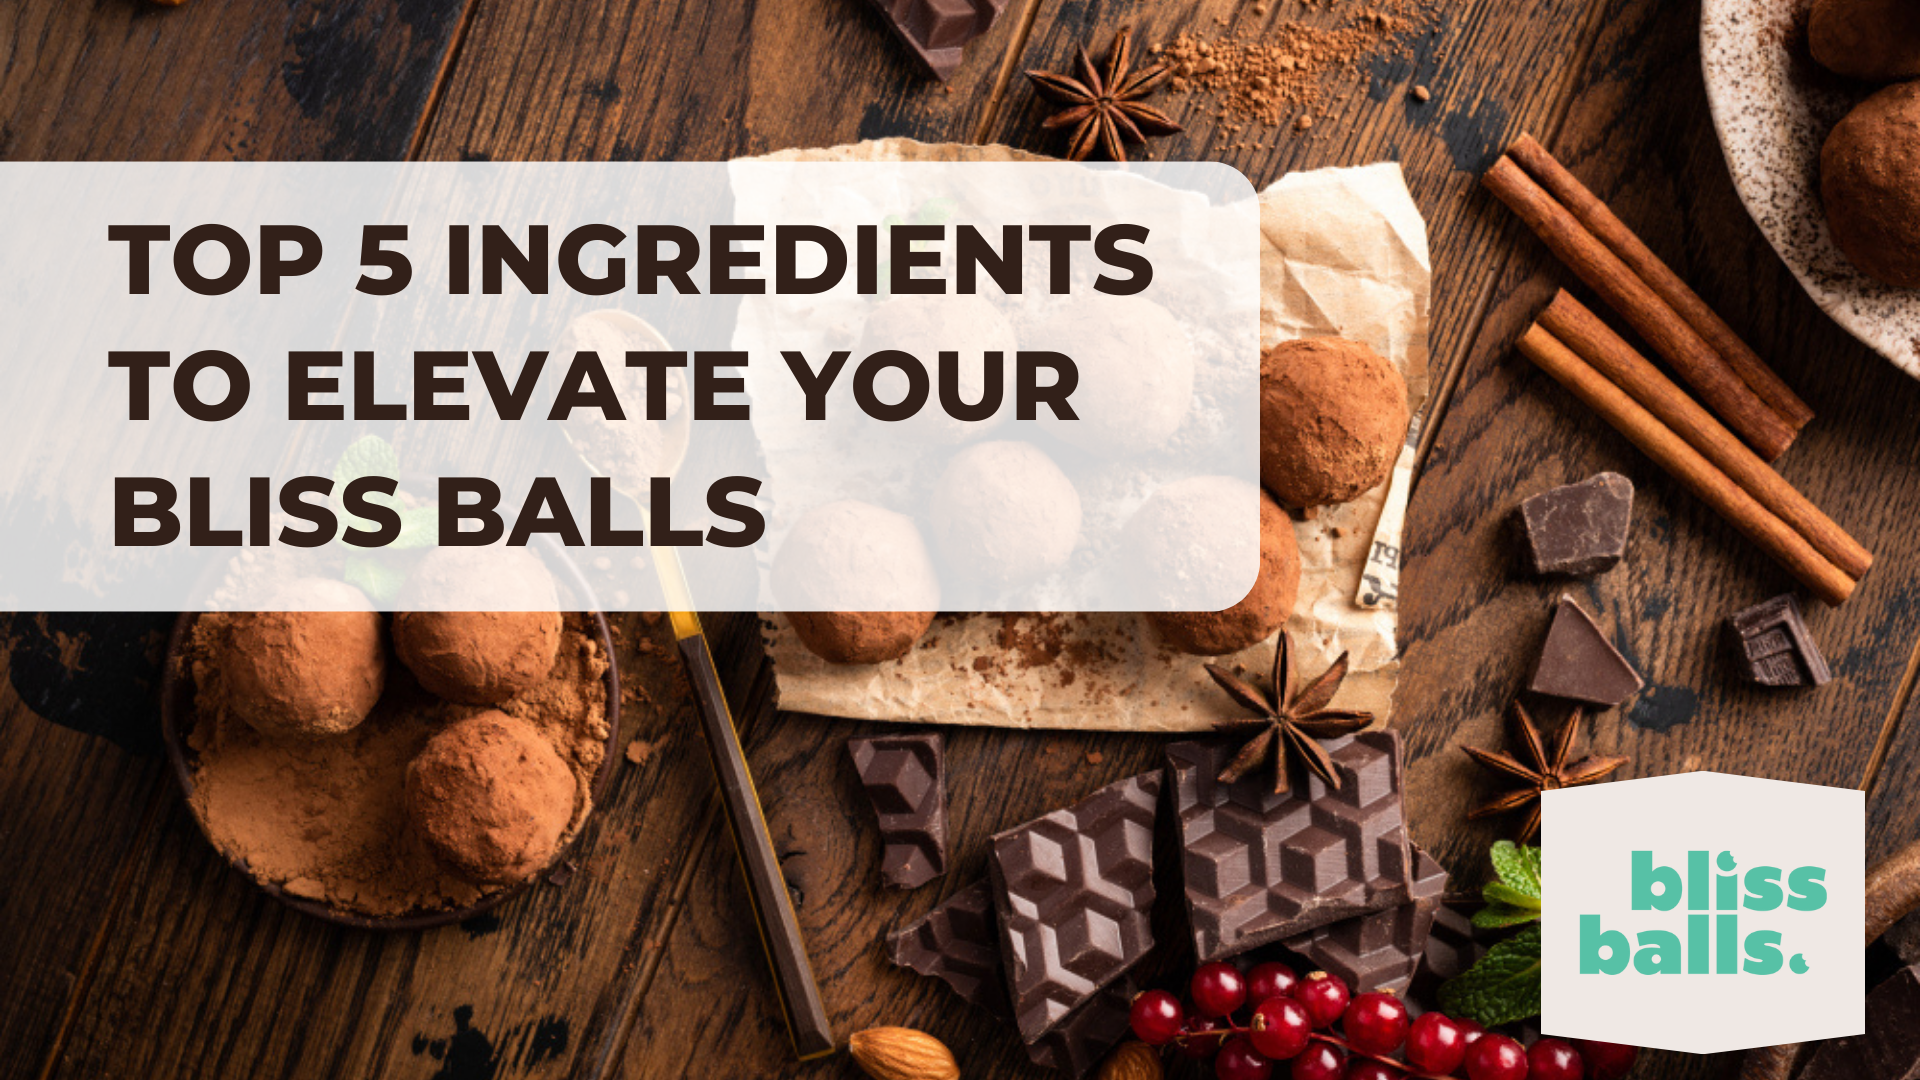 Top 5 Ingredients to Elevate Your Bliss Balls to New Heights of Flavor